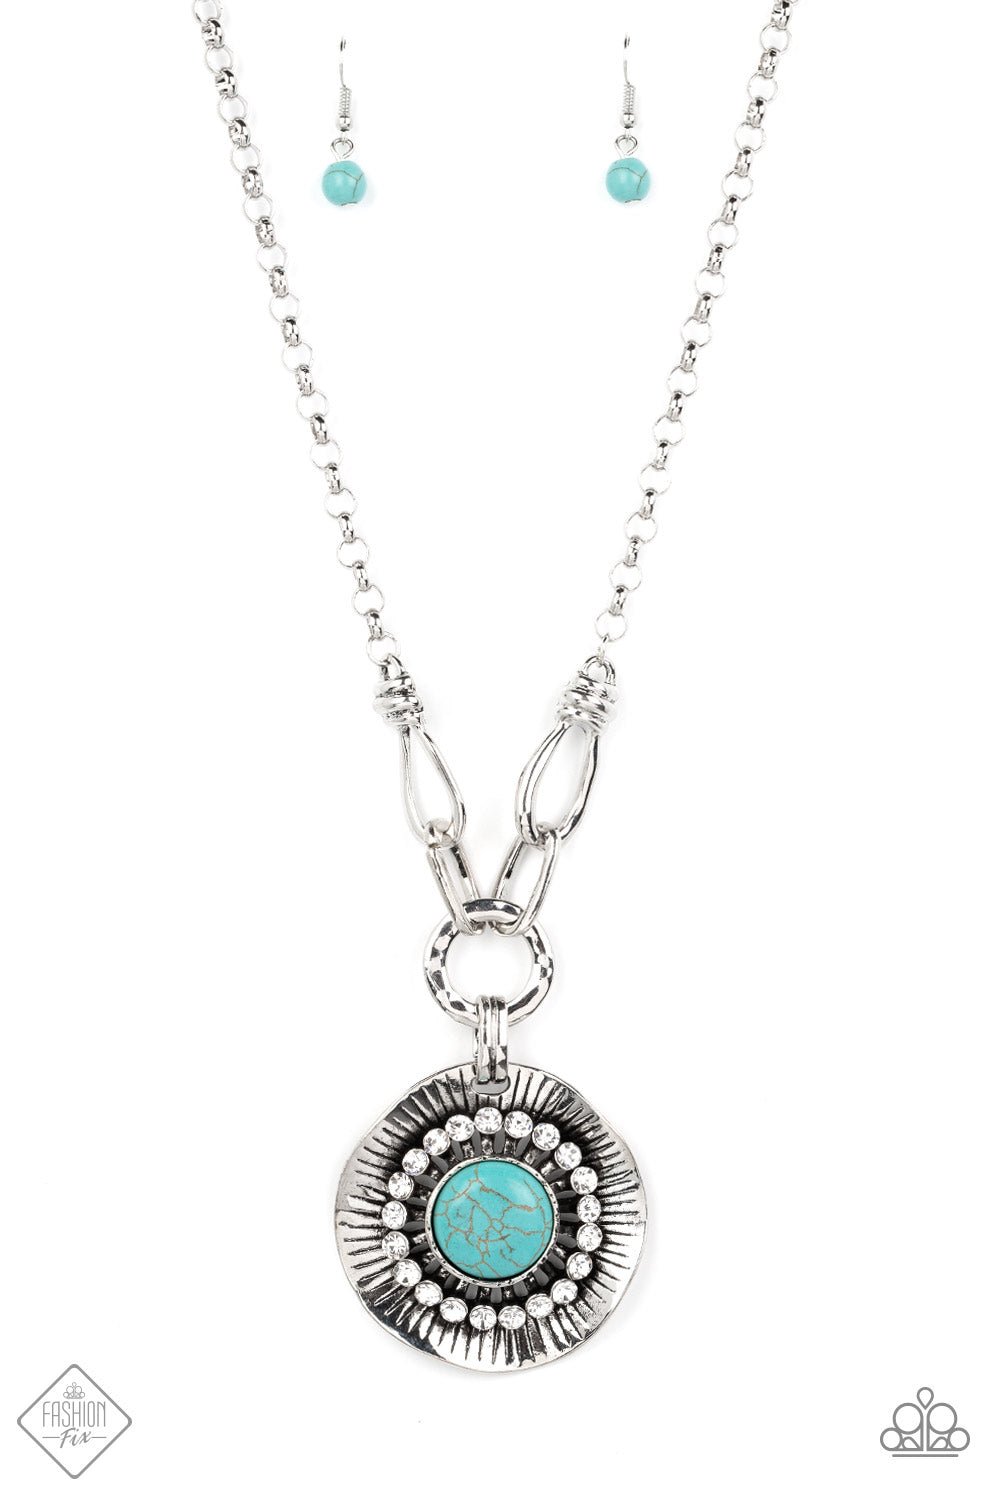 Badlands Treasure Hunt - Blue Turquoise - Silver Necklace - A circle of glassy white rhinestones fans out around an oversized turquoise stone, centered atop a warped silver disc. Etched with linear details, the earthy pendant attaches to oversized silver links, creating an artisan inspired statement necklace.